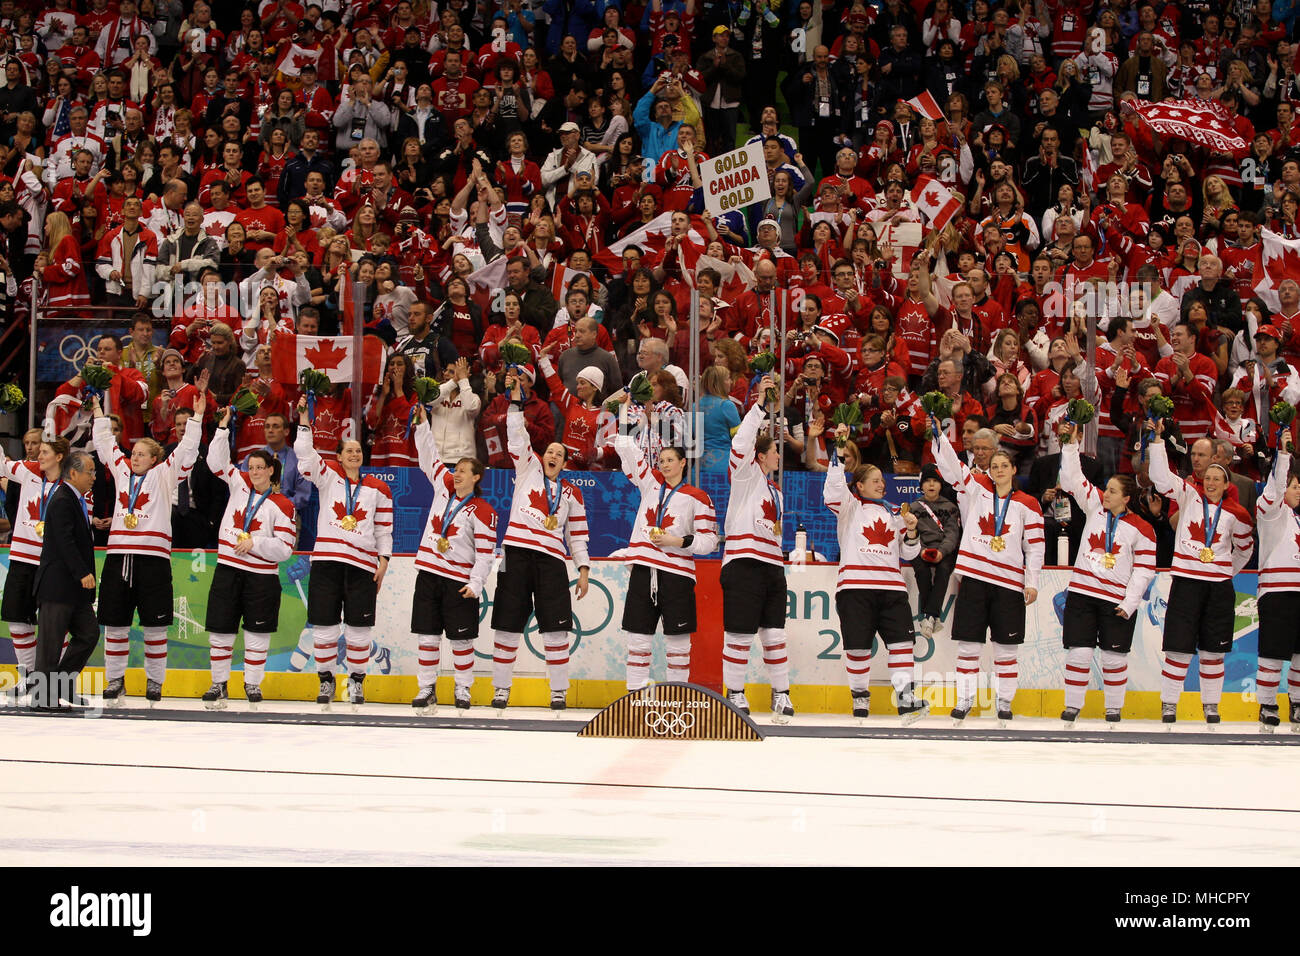 The Canadian Women's  Hockey team after defeating the United States in the final to win the gold medal at the Vancouver Olympics. Stock Photo